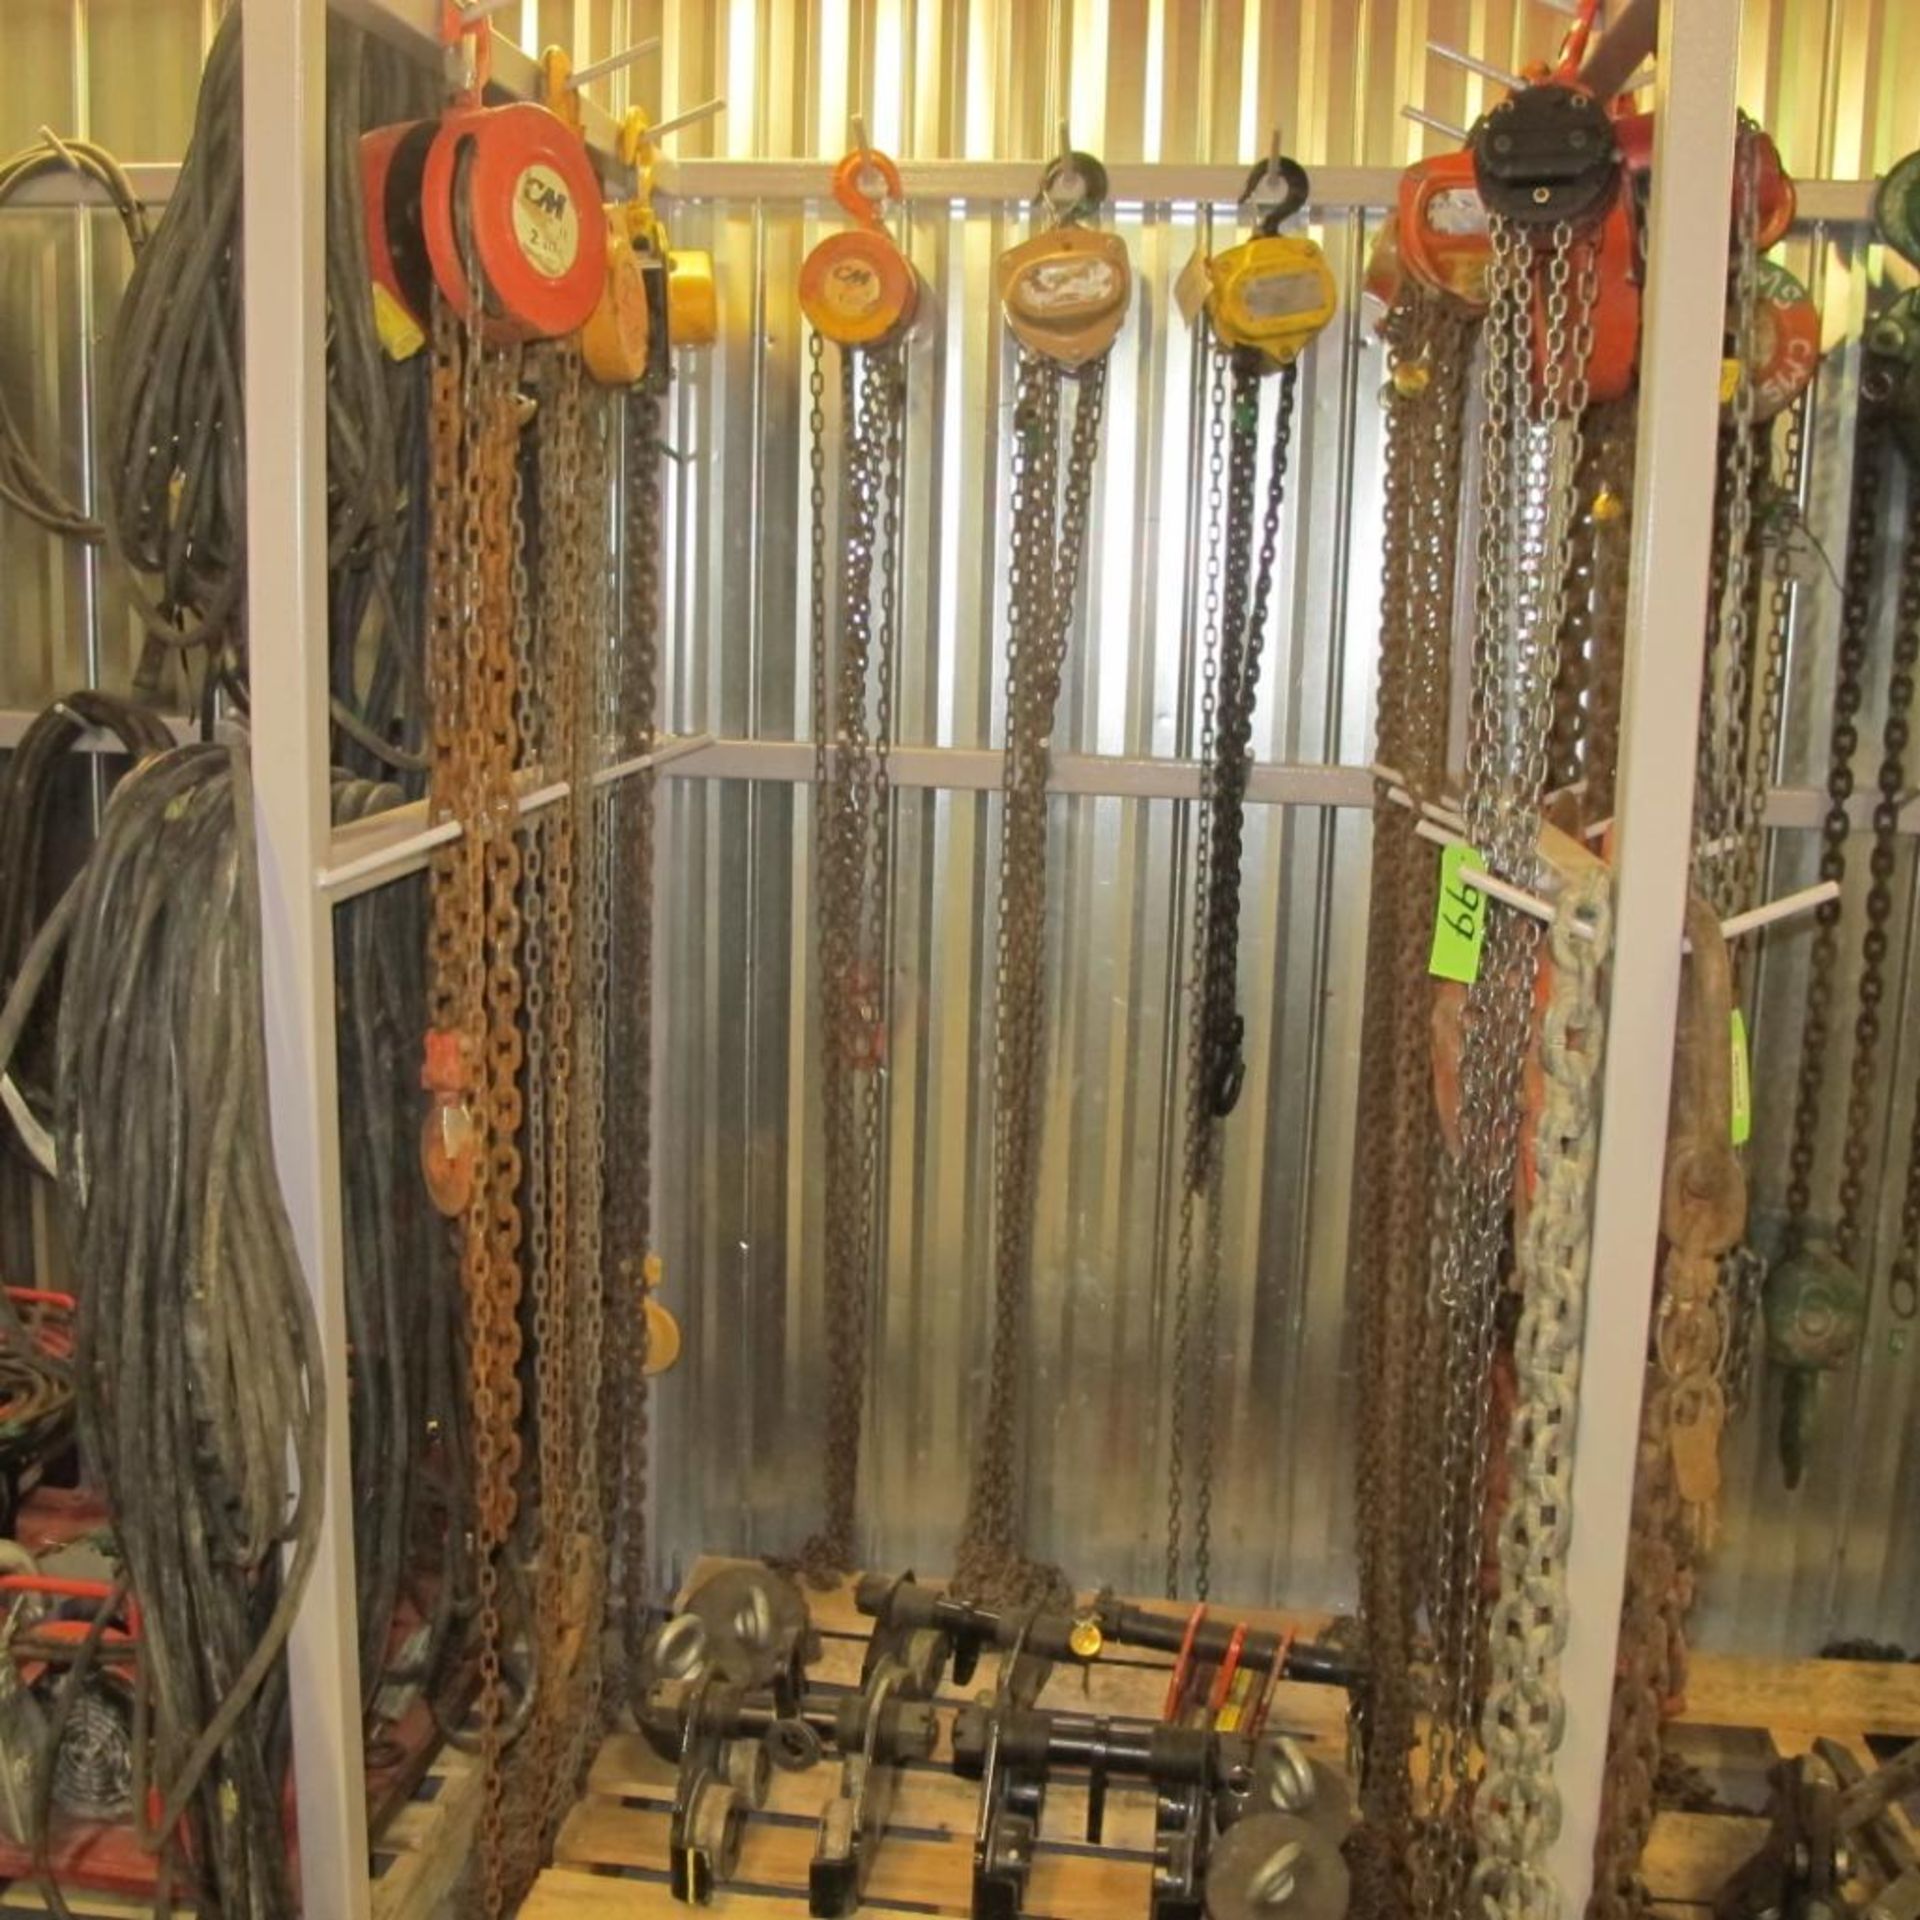 LOT OF 9 CHAIN HOISTS (3 - 2 TON/6 - 1 TON) W/4 TROLLIES AND 4 WEIGHTS ON RACK (UPPER TOOL CRIB)